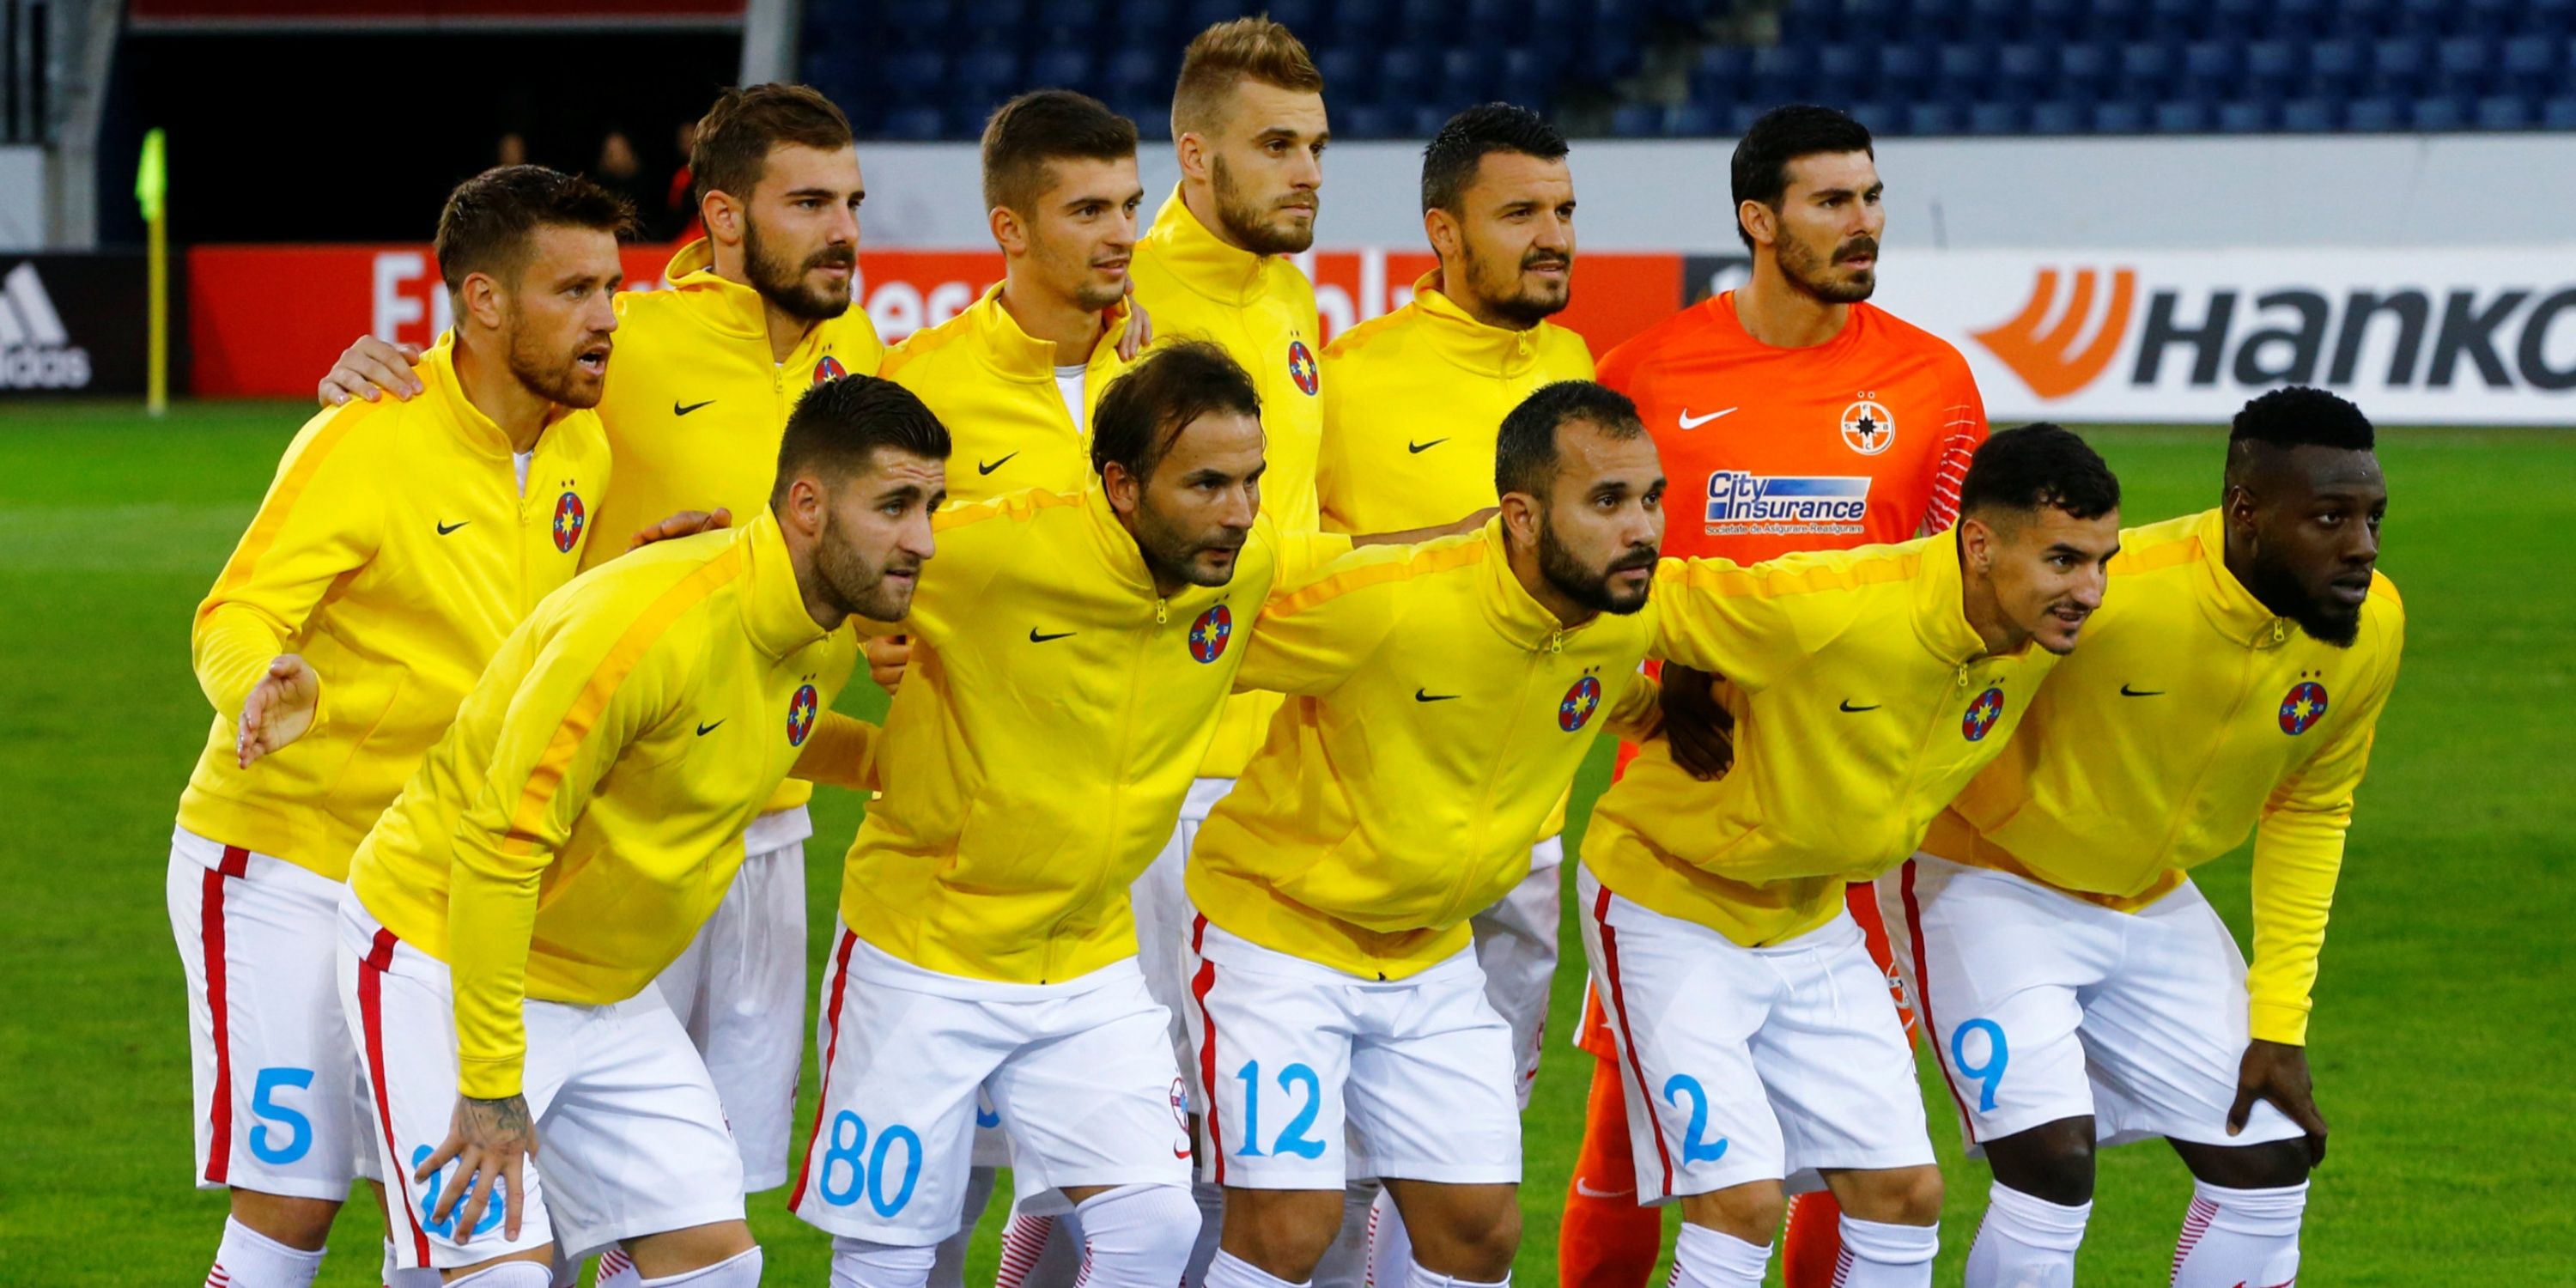 Steaua Bucharest players pose for the pre match photograph.